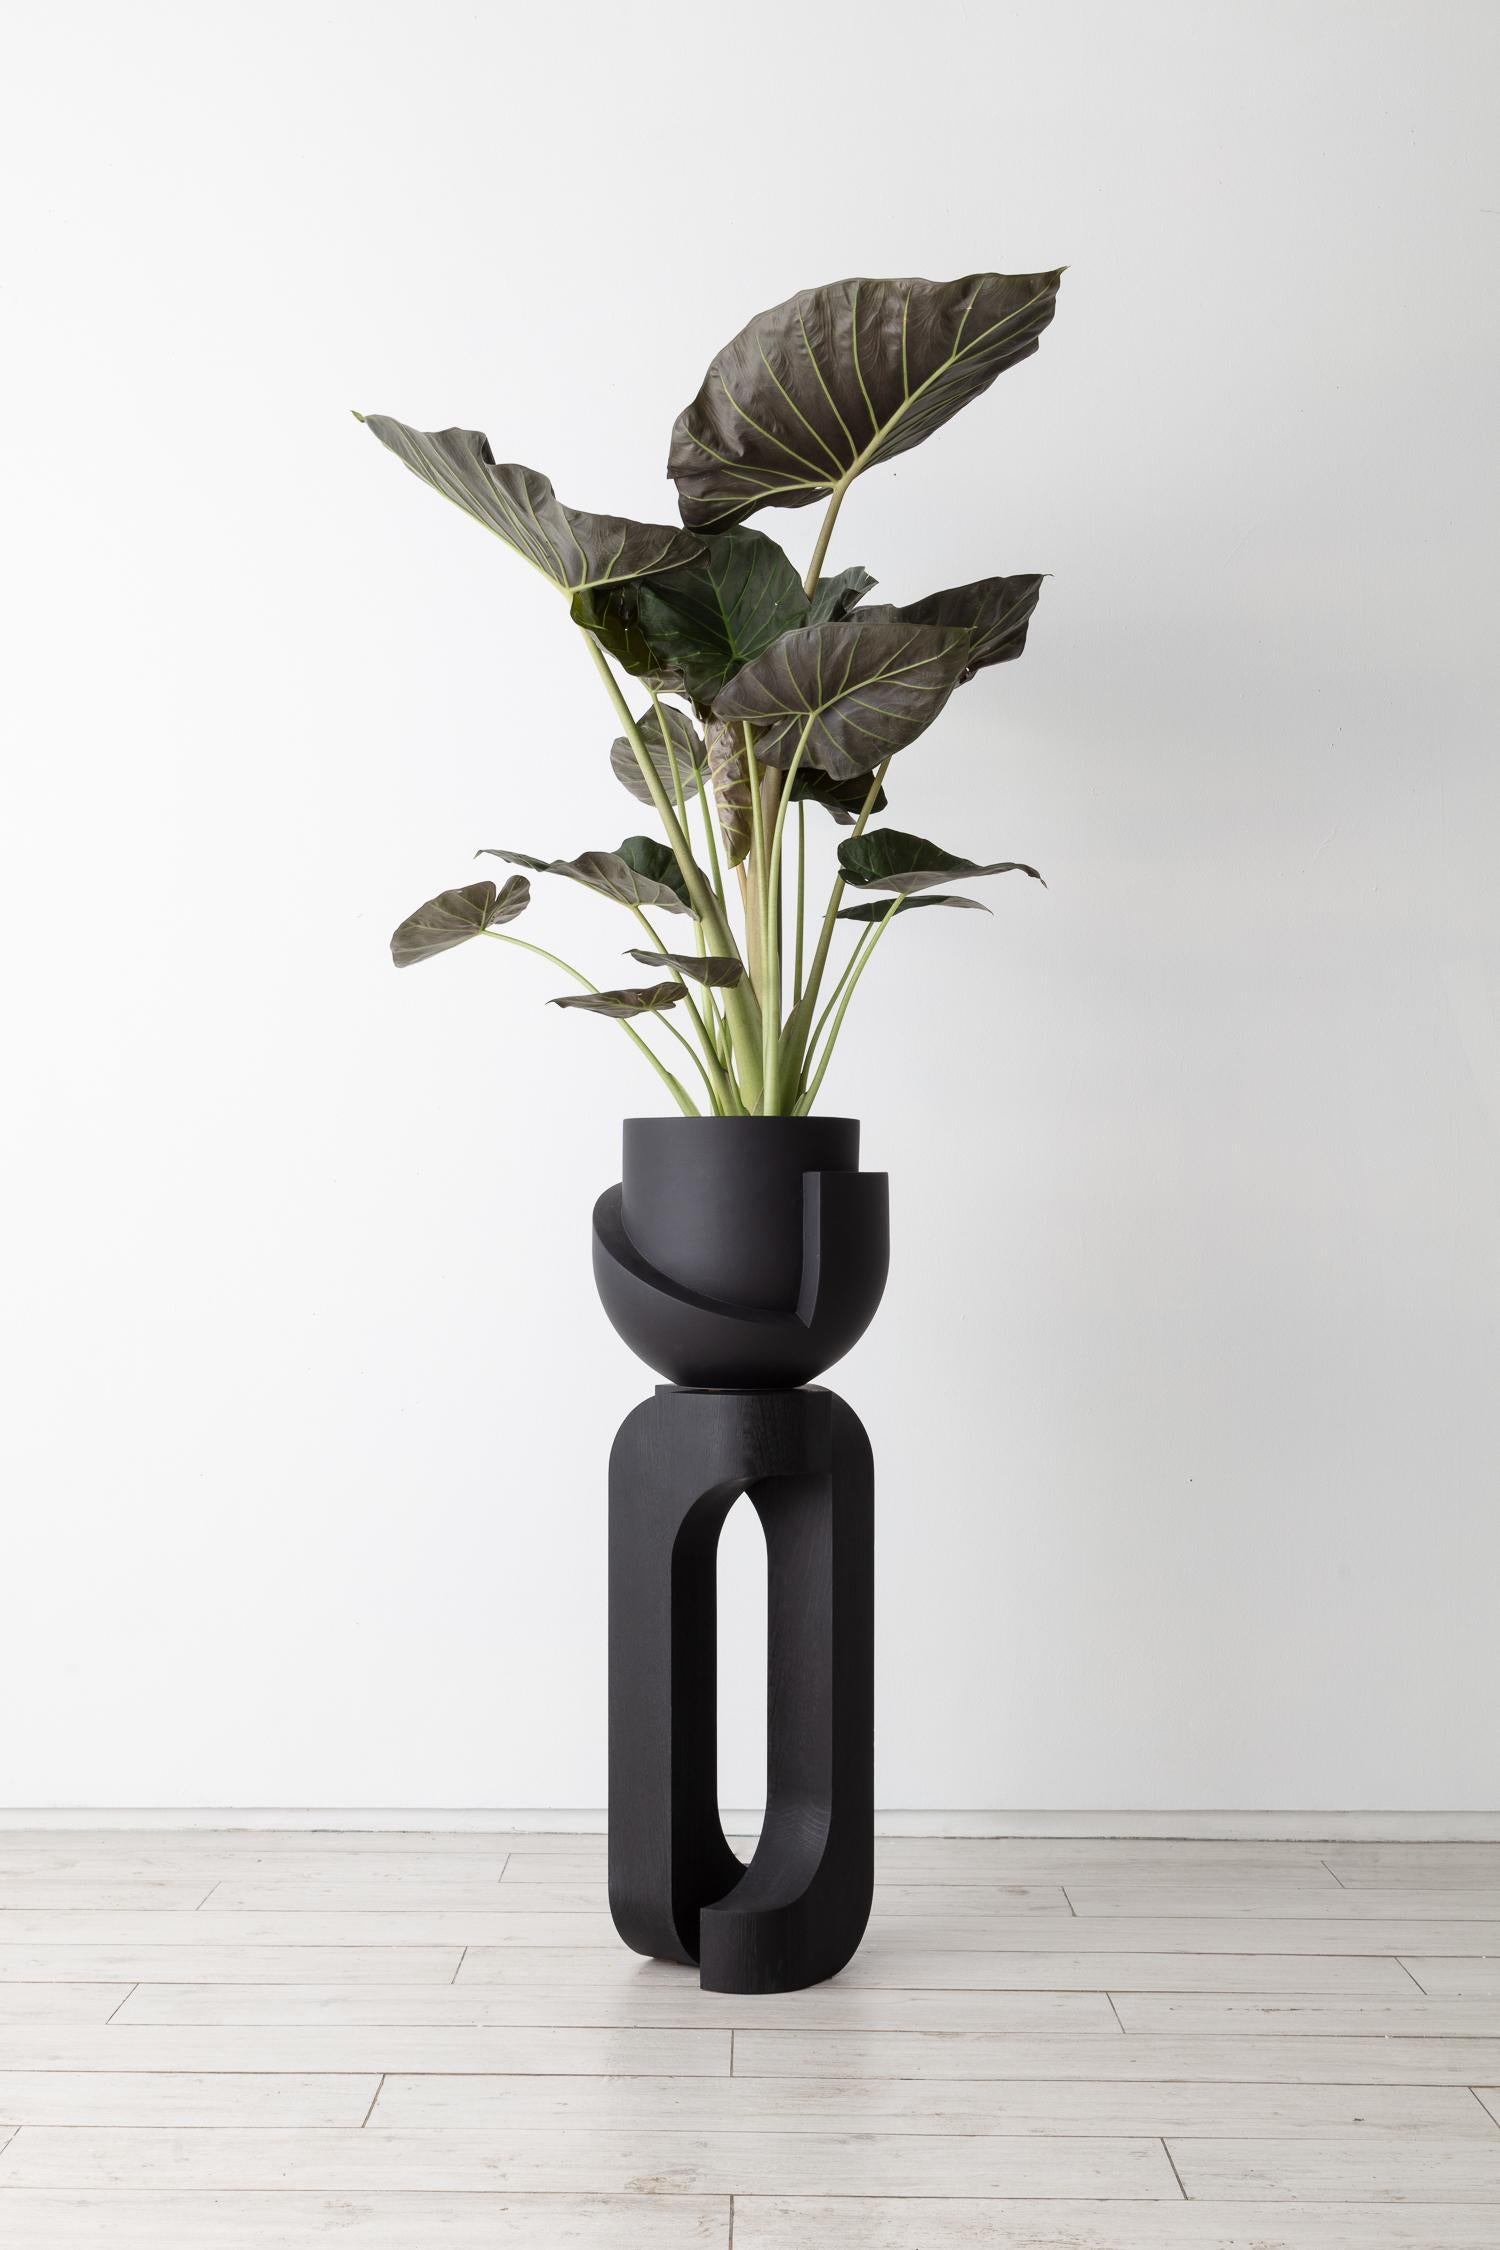 Vayu Coal with Sculptural Pedestal.

Solid oak plant stand handmade in Brooklyn by Joel Seigle, paired with our Coal Vayu Planter.

Materials: Vessel earthenware, base solid oak

Each stand is made to order, please allow 8-12 weeks for